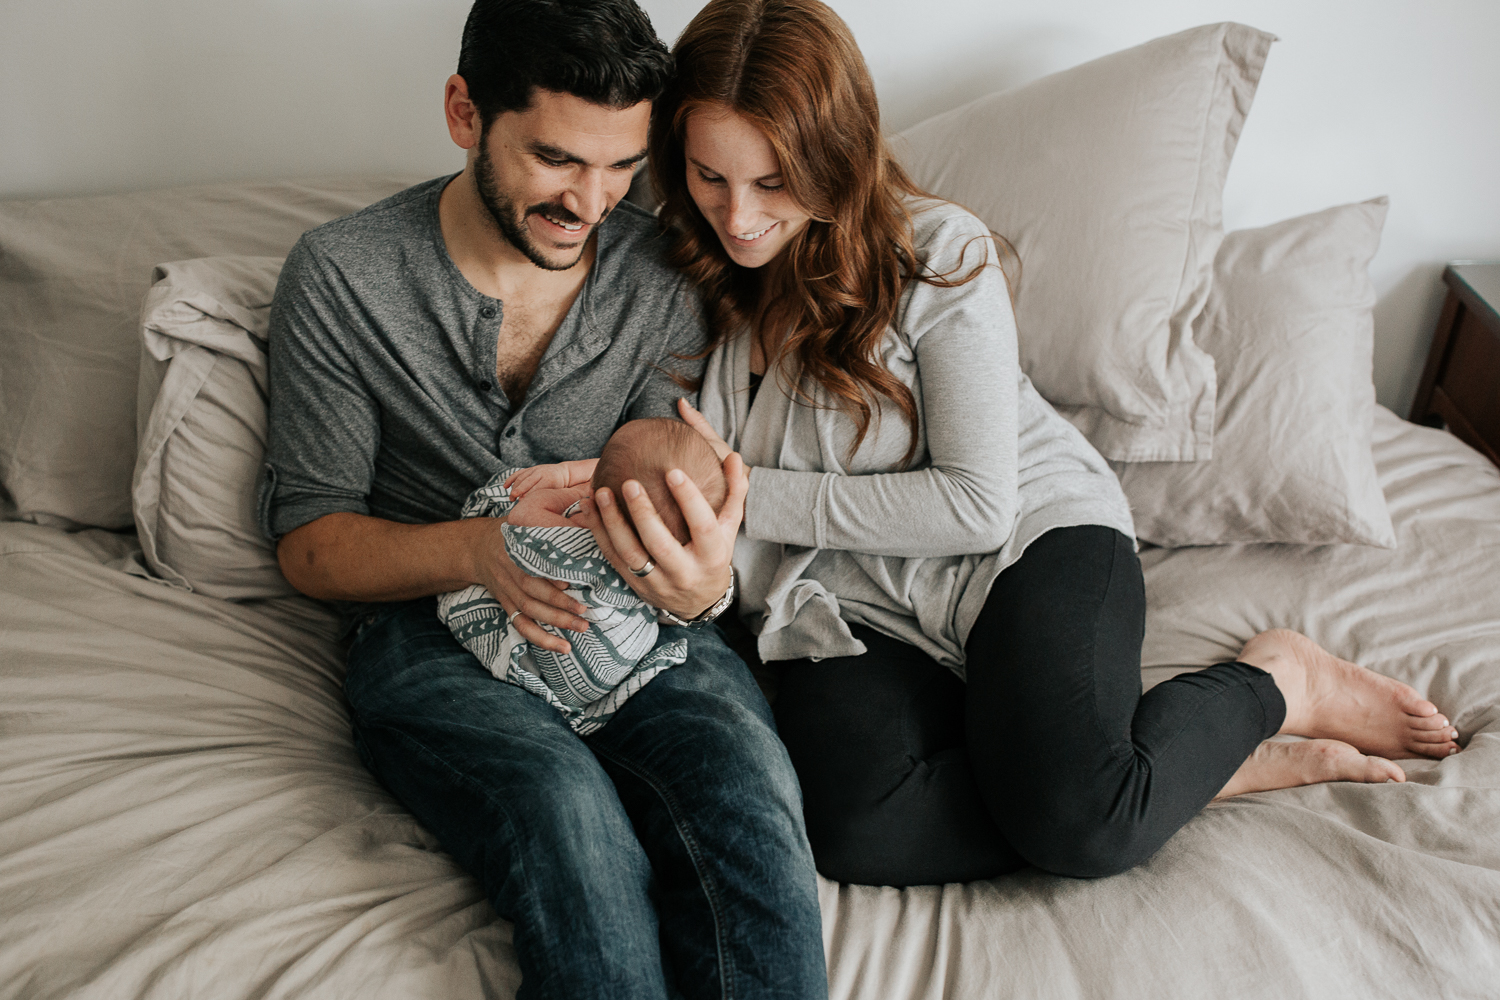 new parents sitting on master bed, dad holding 2 week old baby boy, mom snuggled next to them, smiling at son - Stouffville Lifestyle Photography